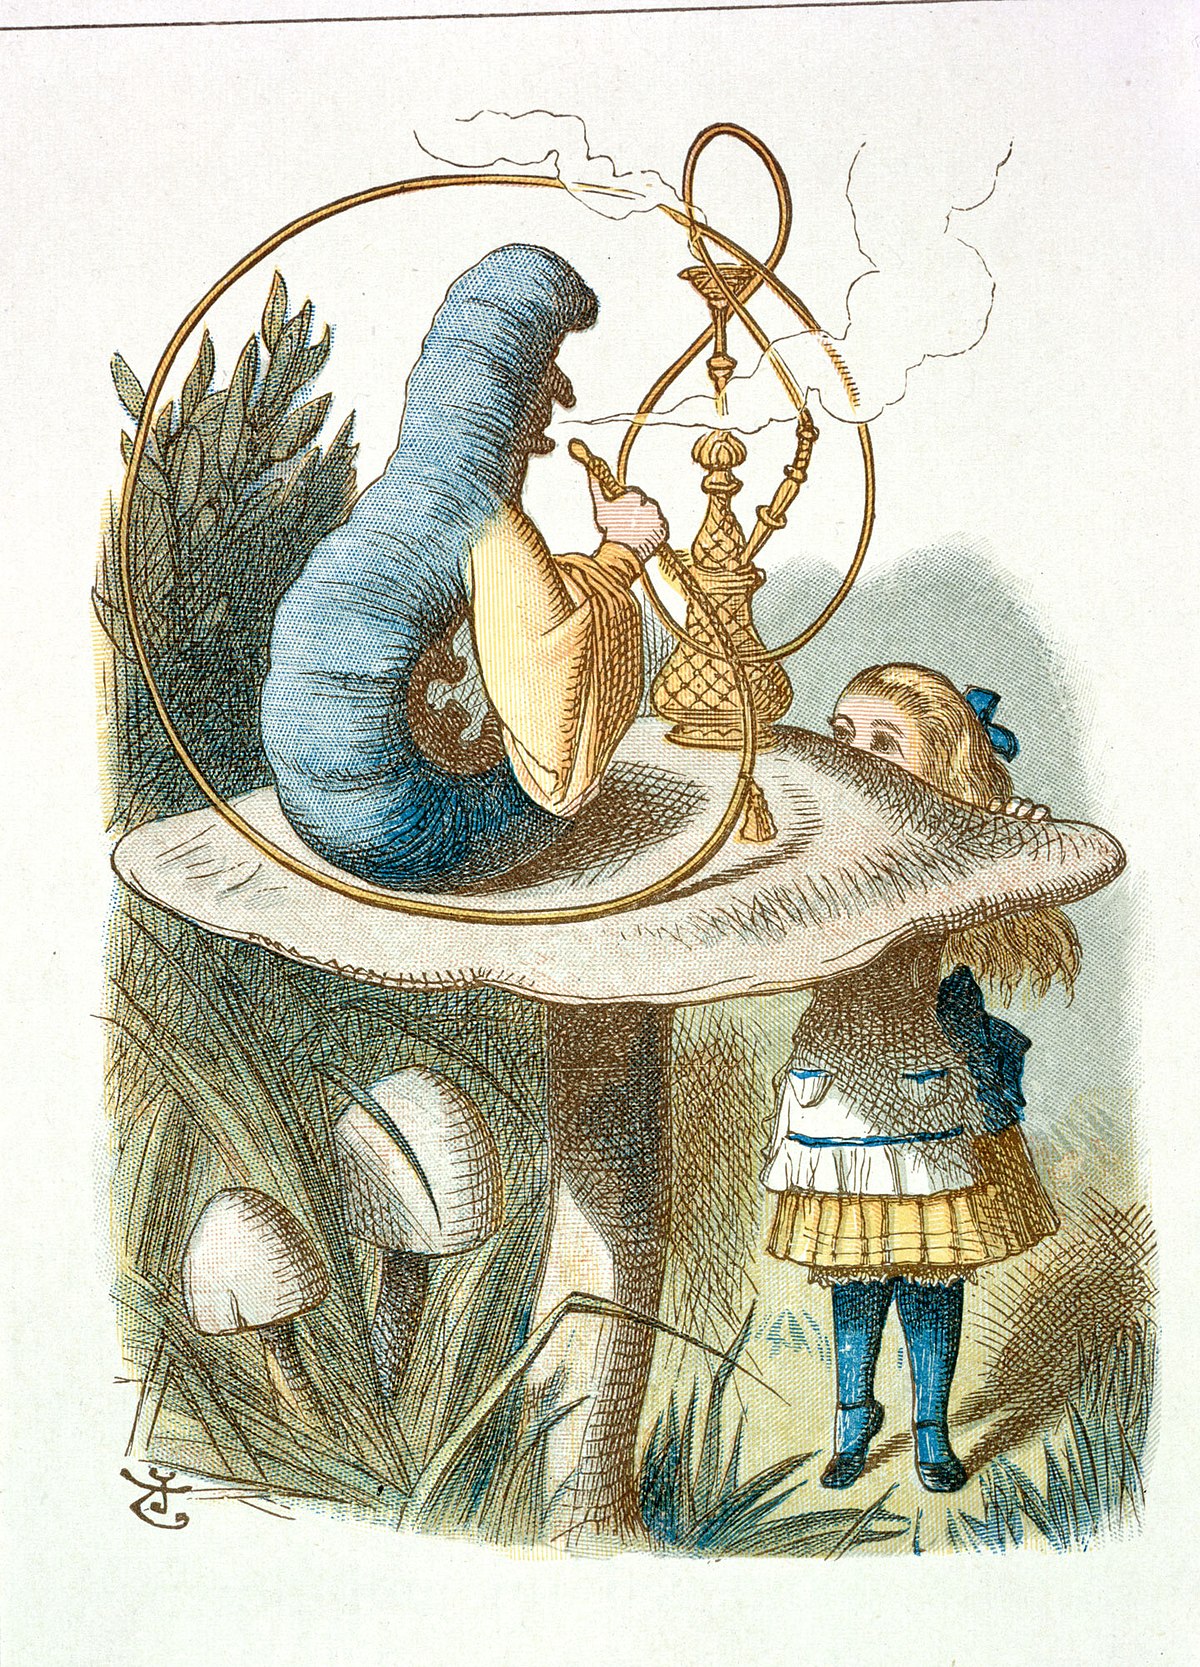 Is alice in wonderland copyrighted image